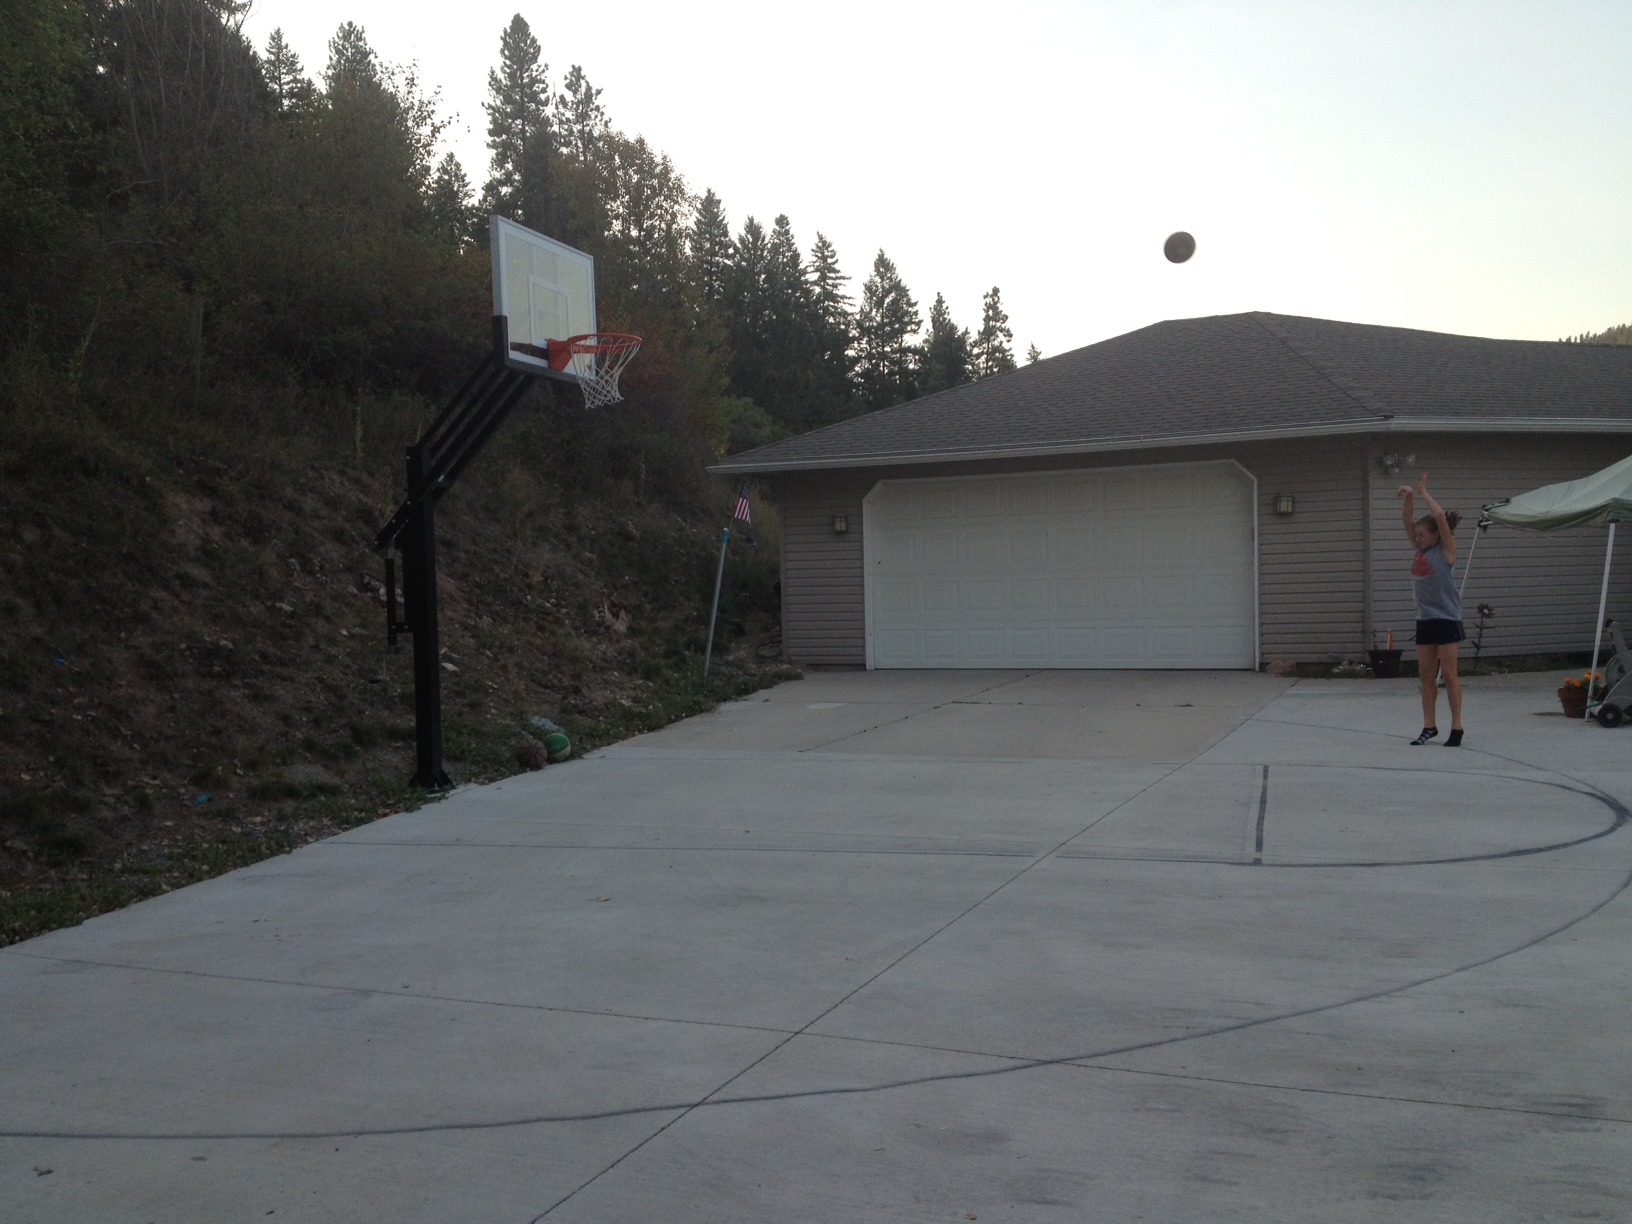 Kelly's daughter attempts a three pointer from the house side of the court.